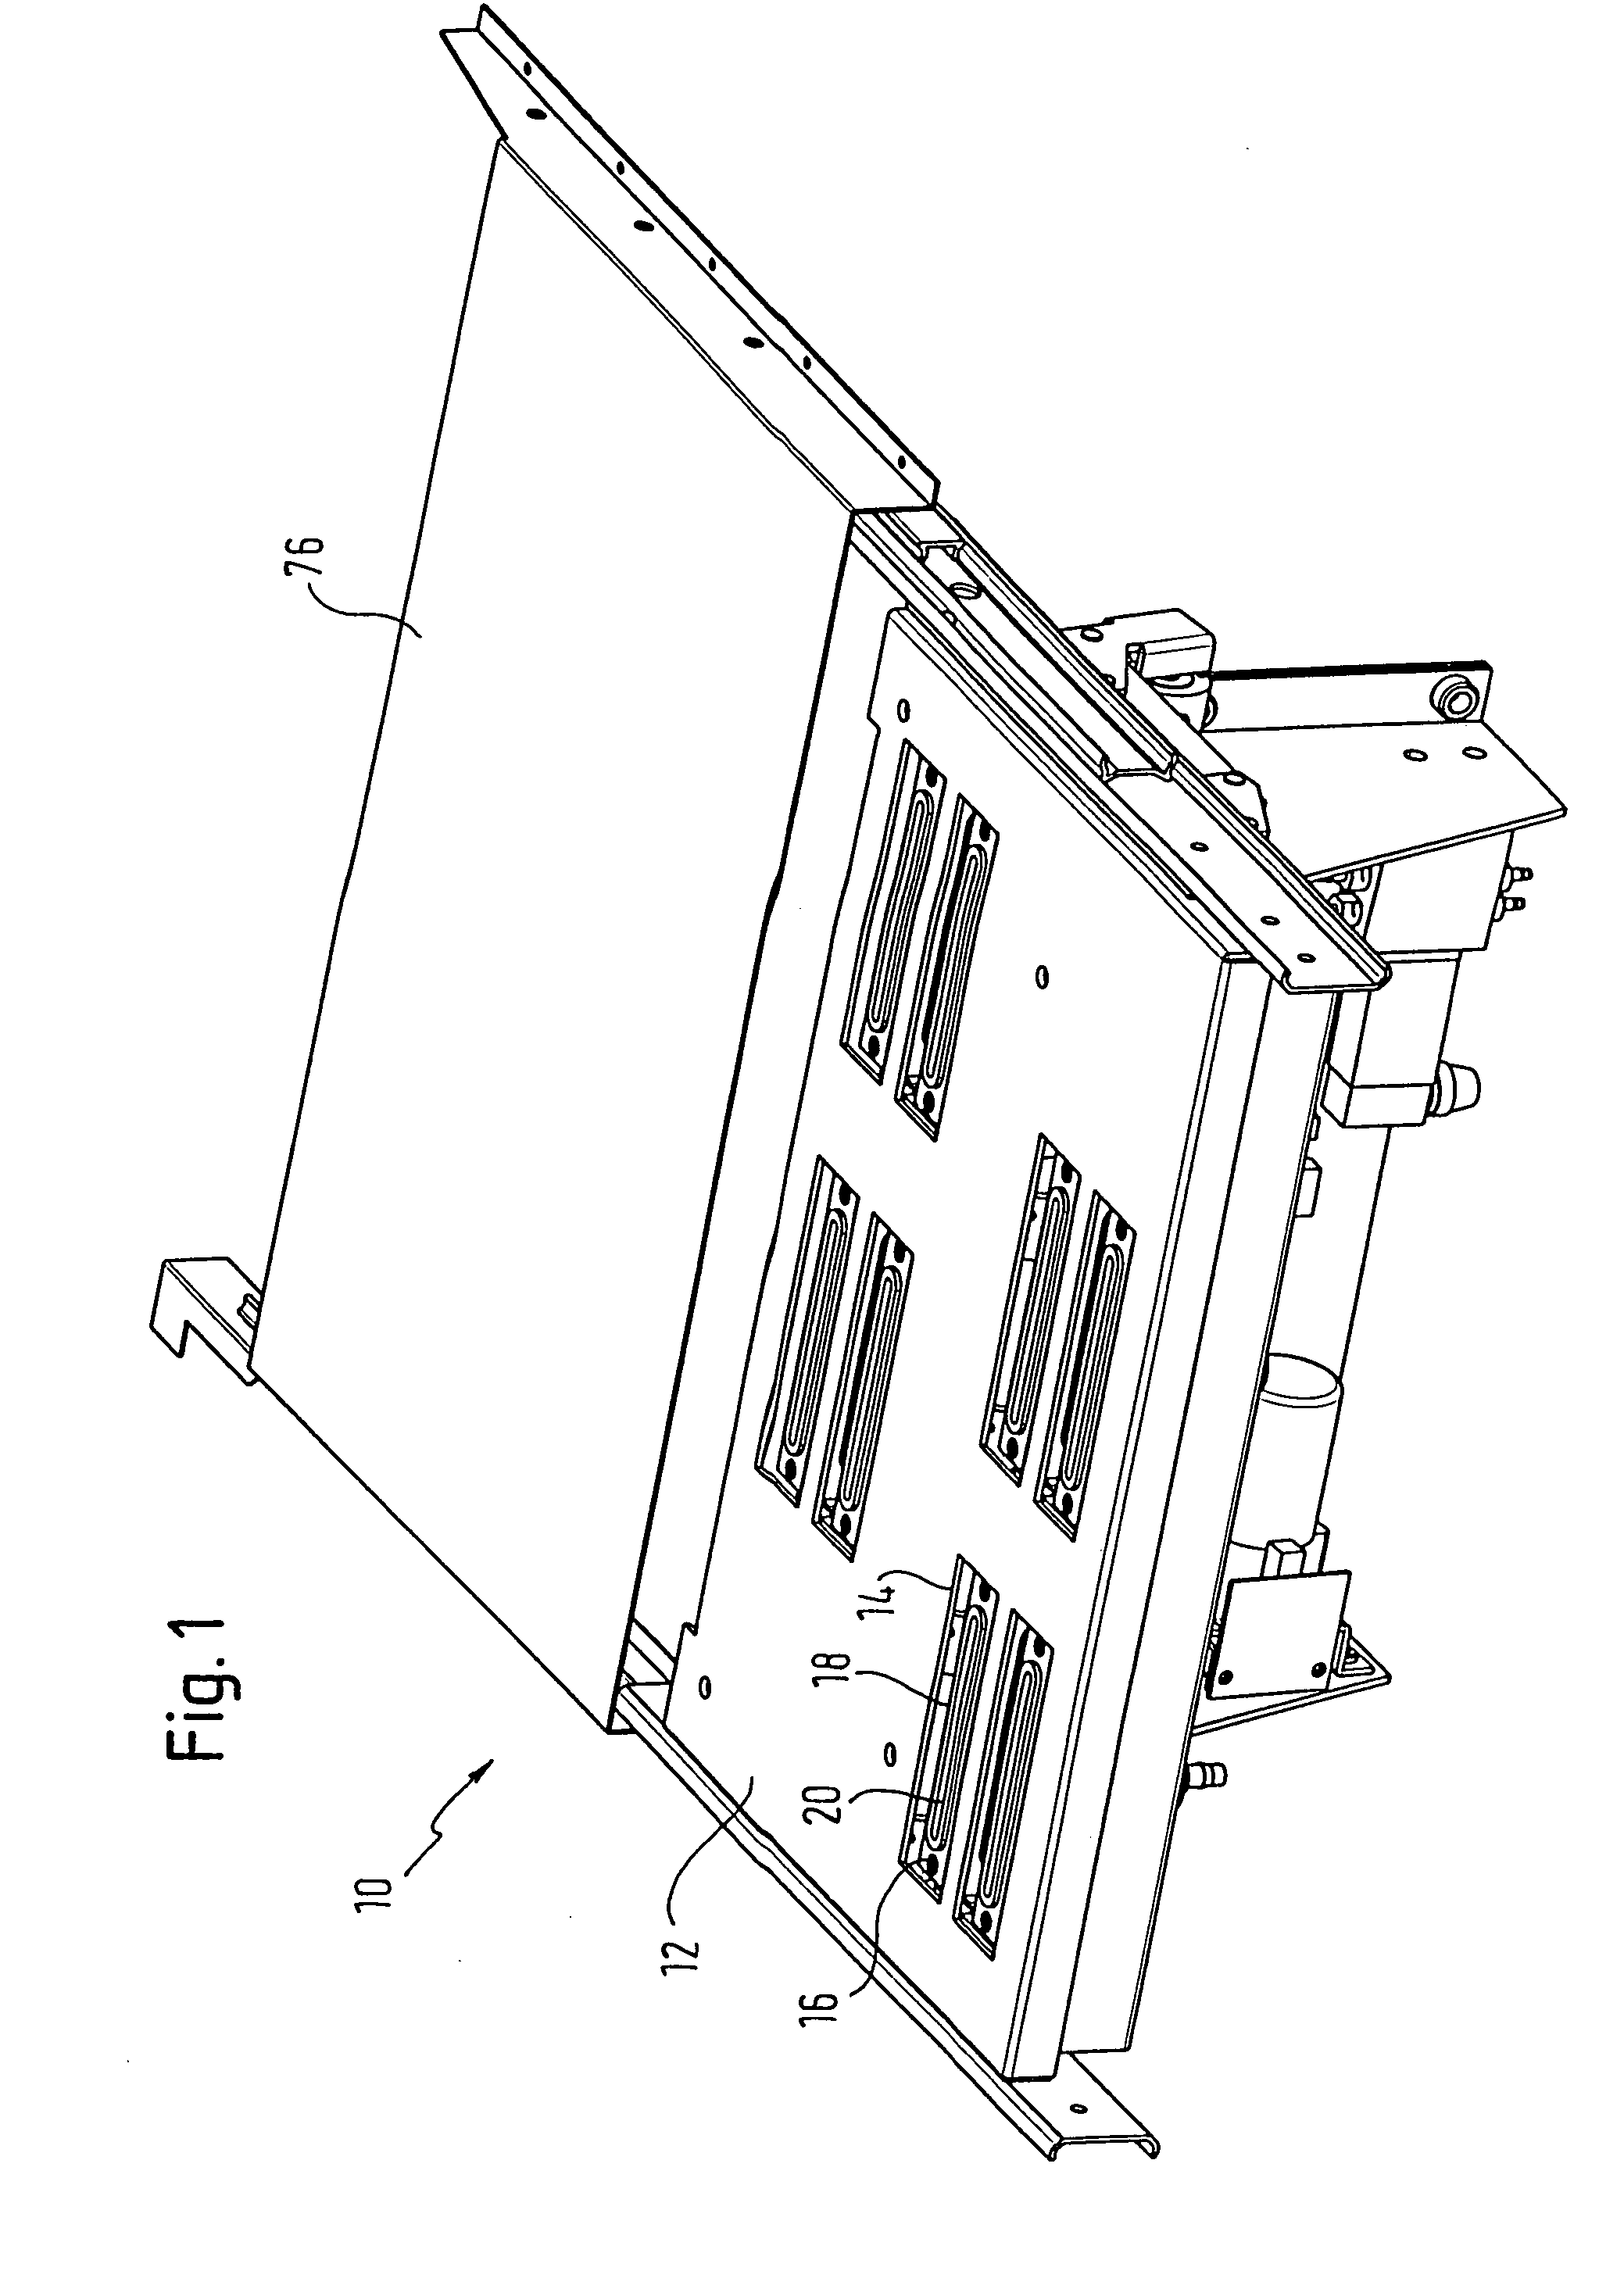 Cleaning unit for an inkjet printing device